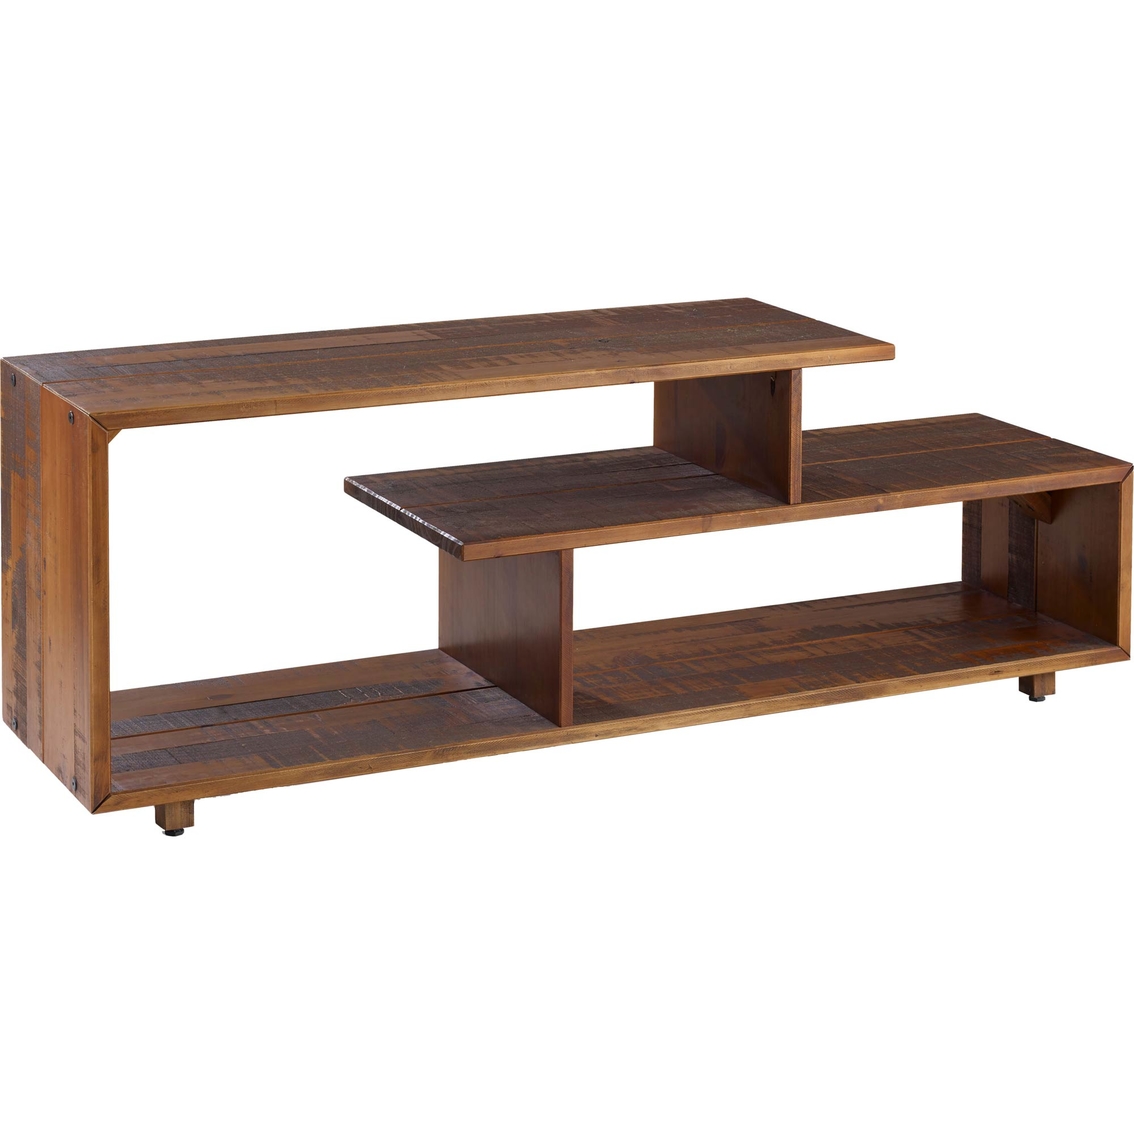 Walker Edison 60 in. Rustic Modern Solid Wood TV Stand - Image 2 of 3